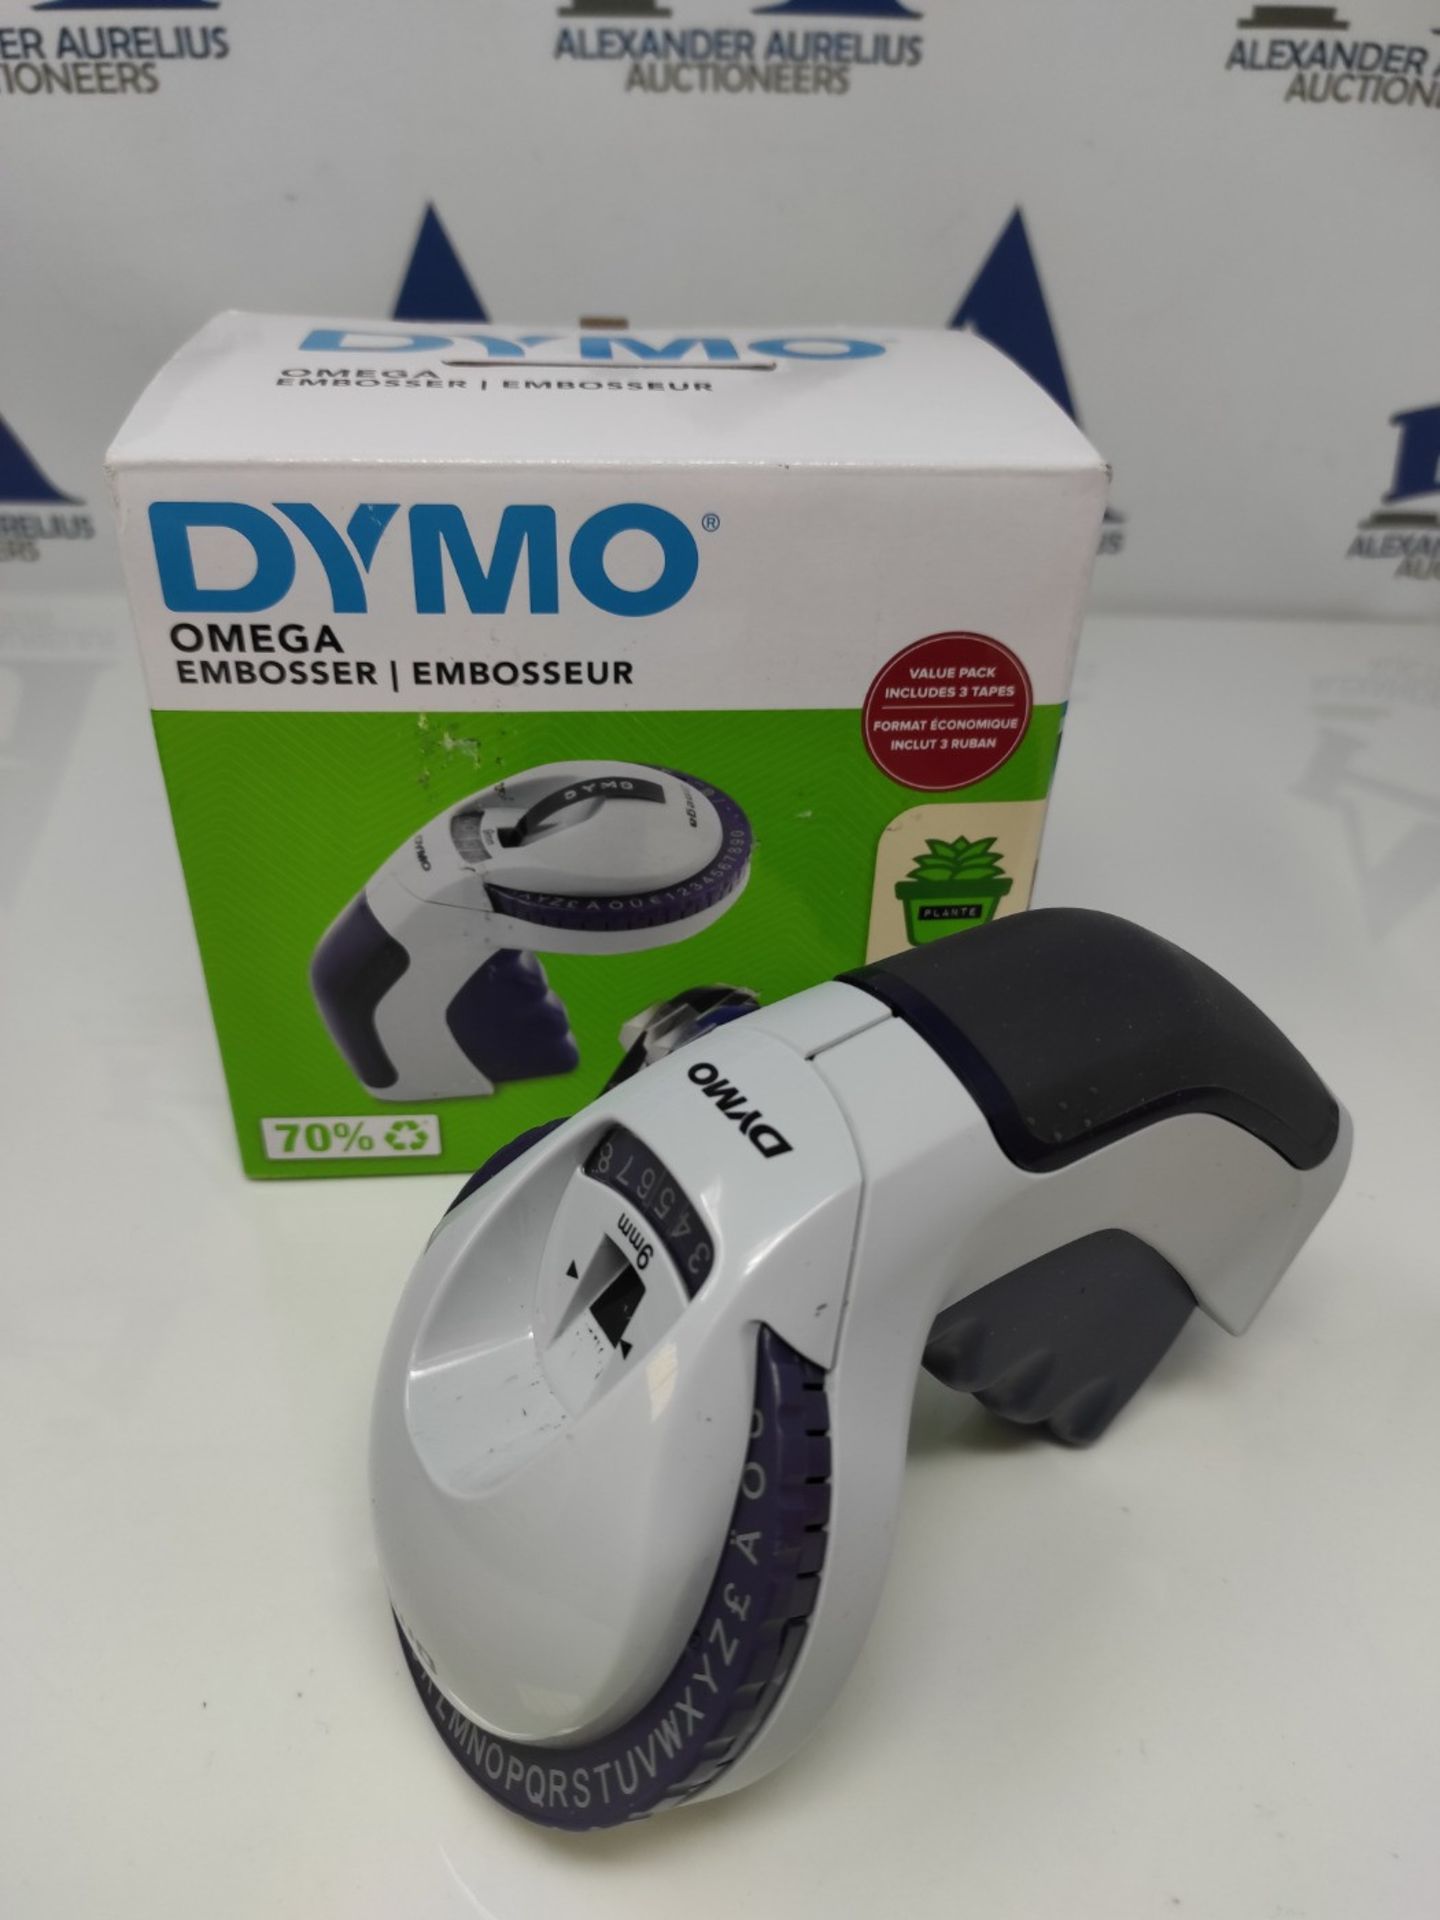 DYMO Marking System with 3 tapes - Starter Kit for the Omega label maker - Compact des - Image 2 of 2